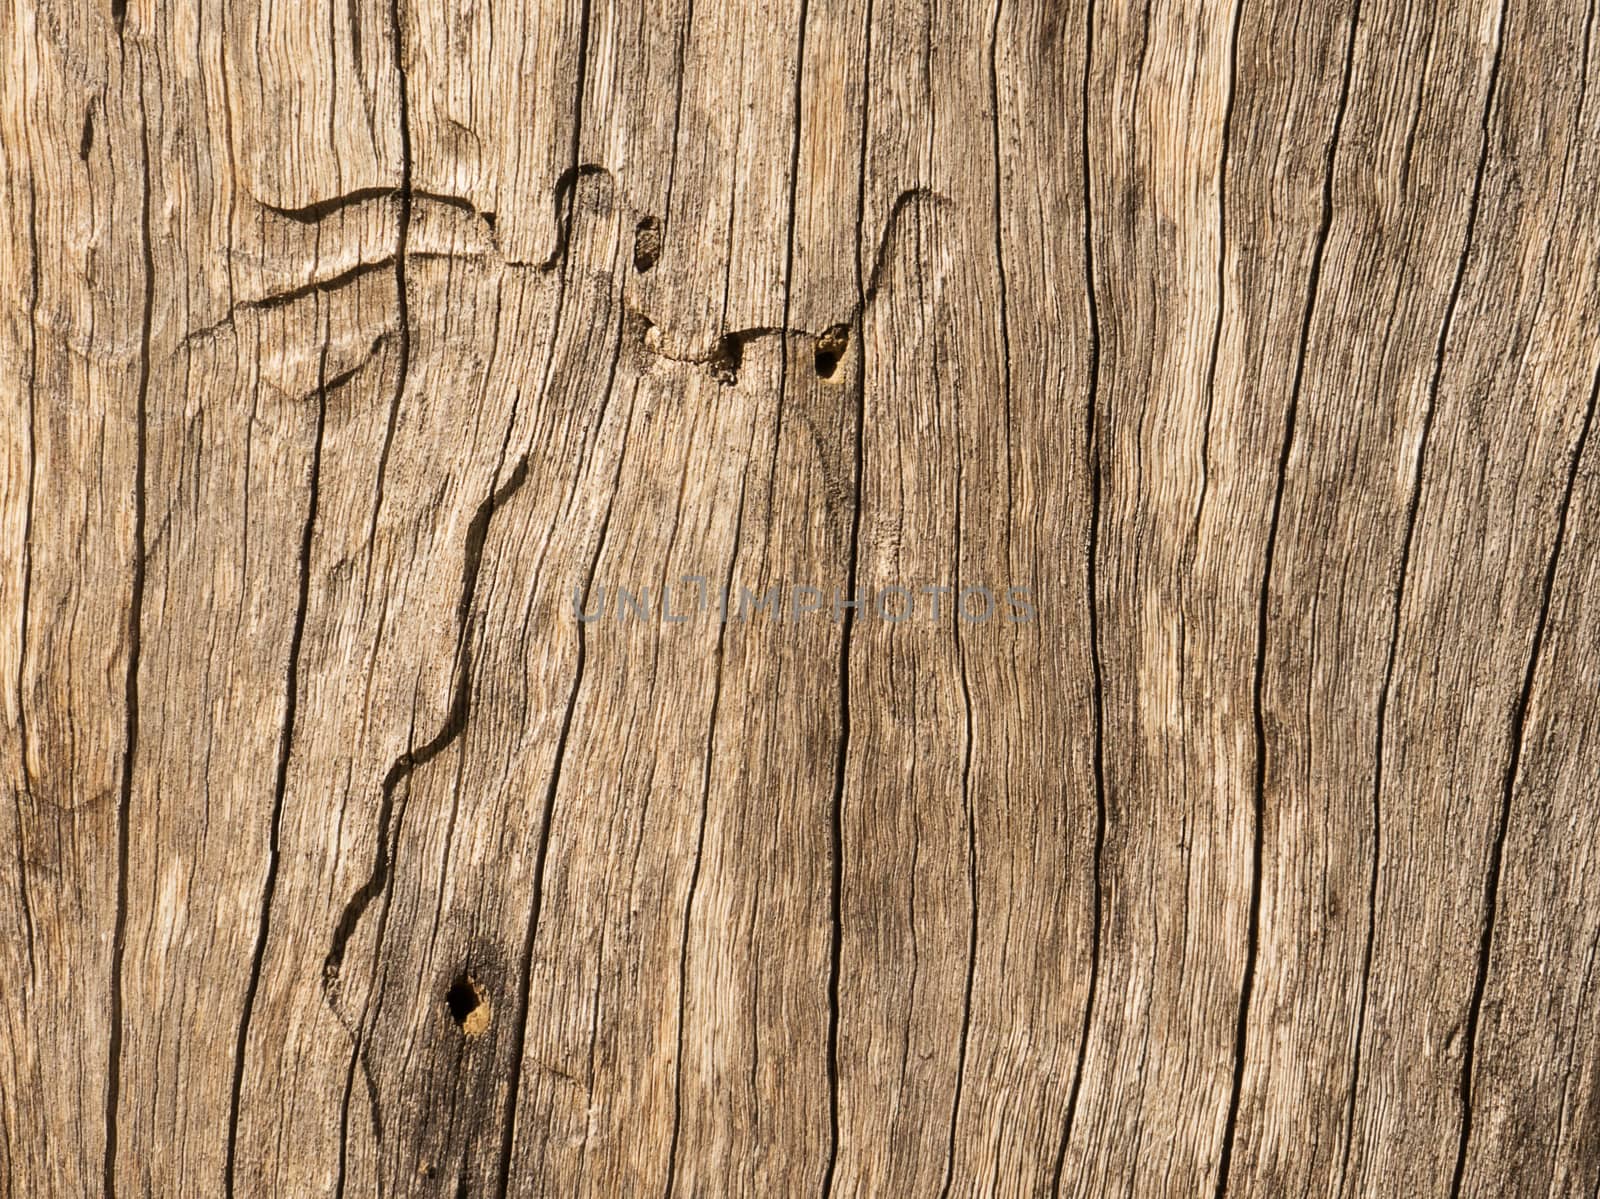 Timber Texture Background by sherj